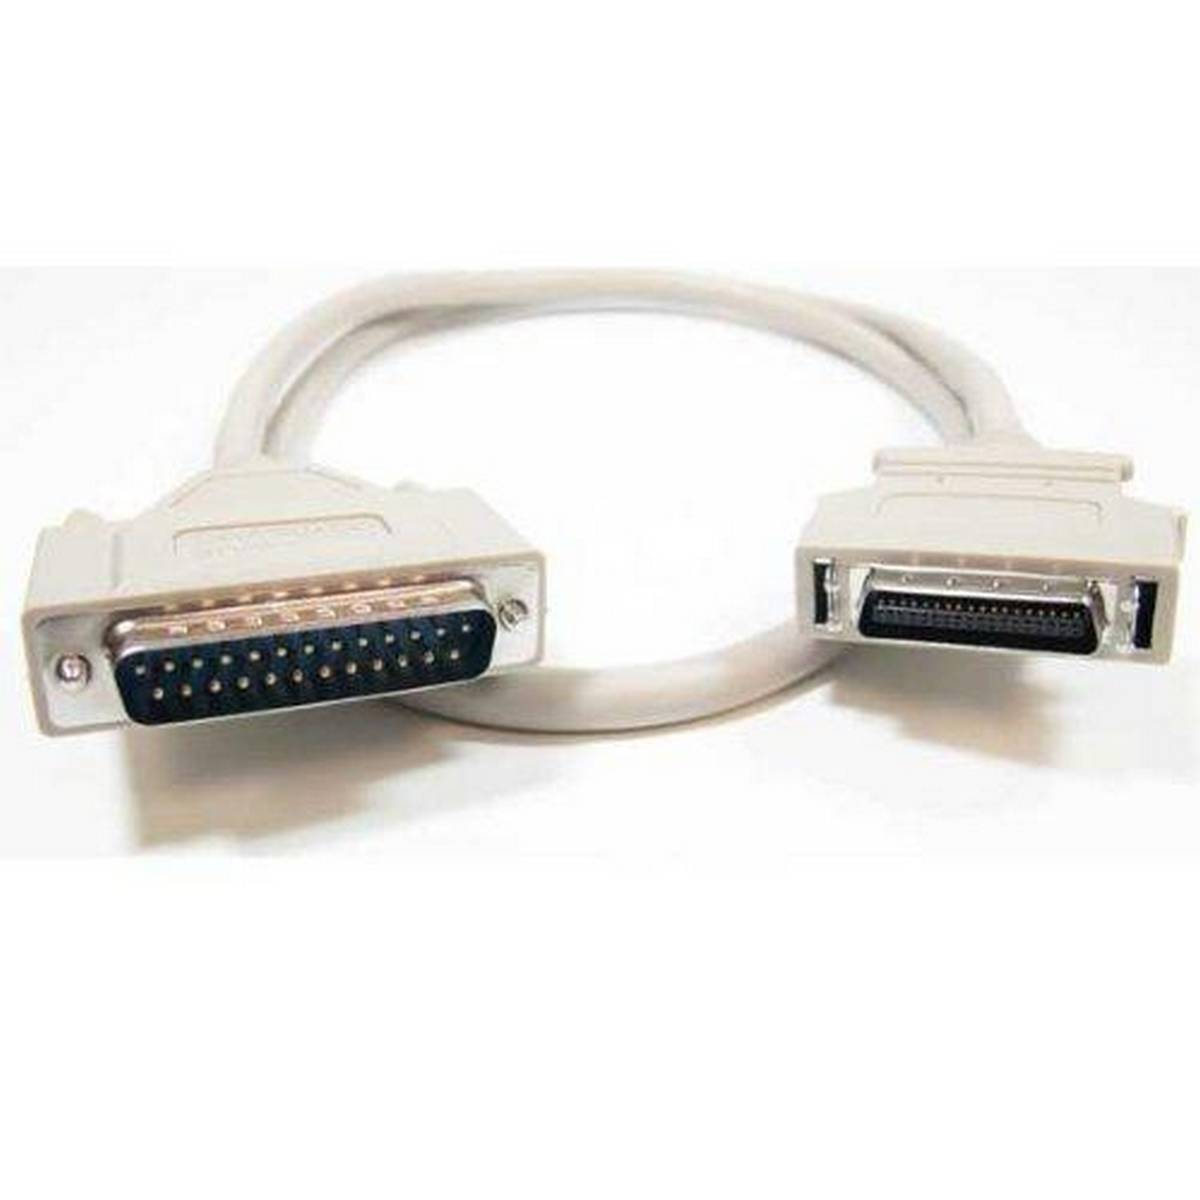 hp laserjet 1100 usb cable adapter